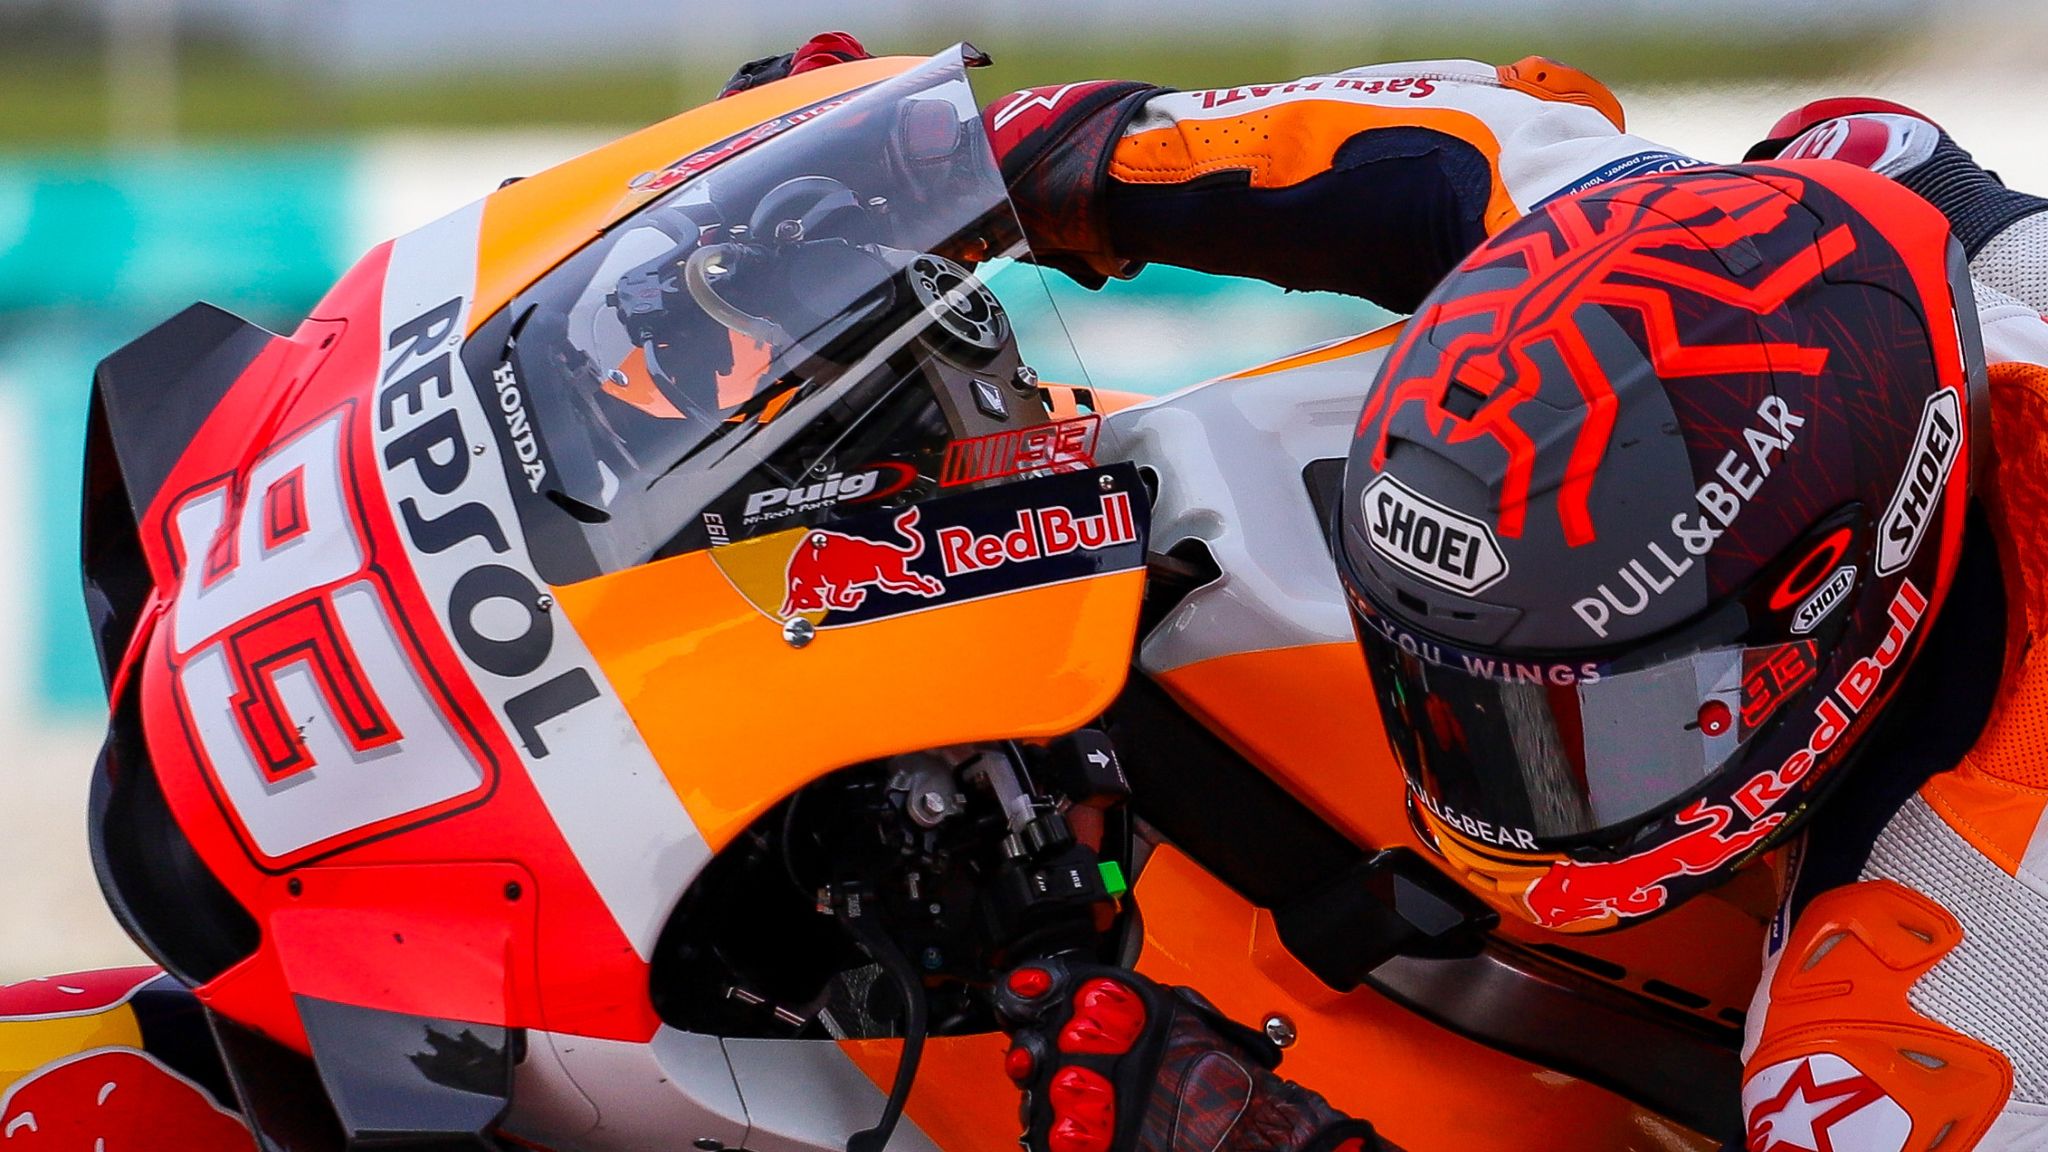 MotoGP to start in Jerez on July 19 with double header Motor Racing News Sky Sports